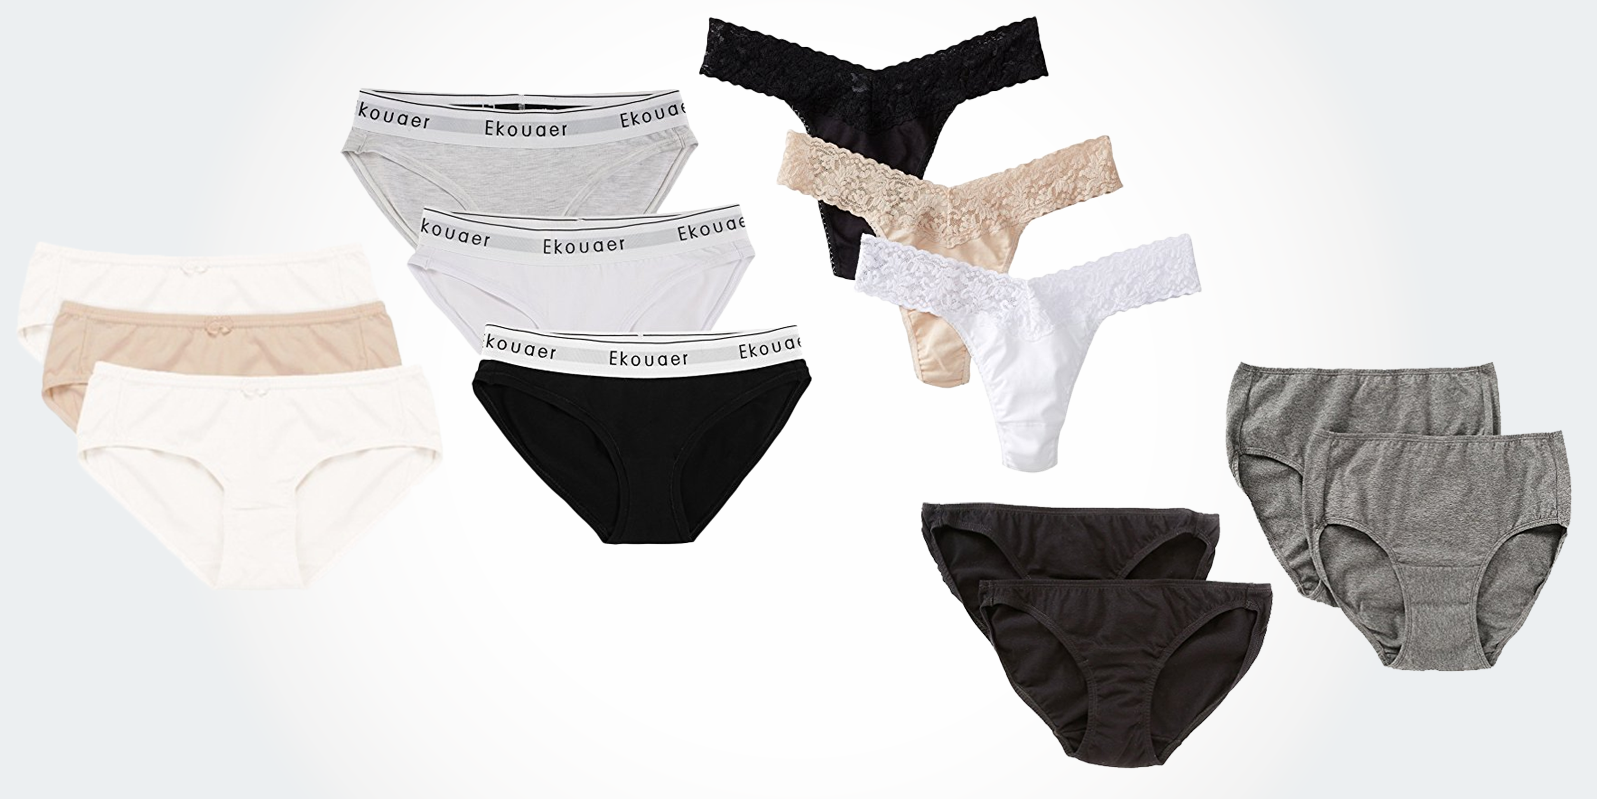 Organic cotton underwear made in the USA - Decent Exposures, Inc.